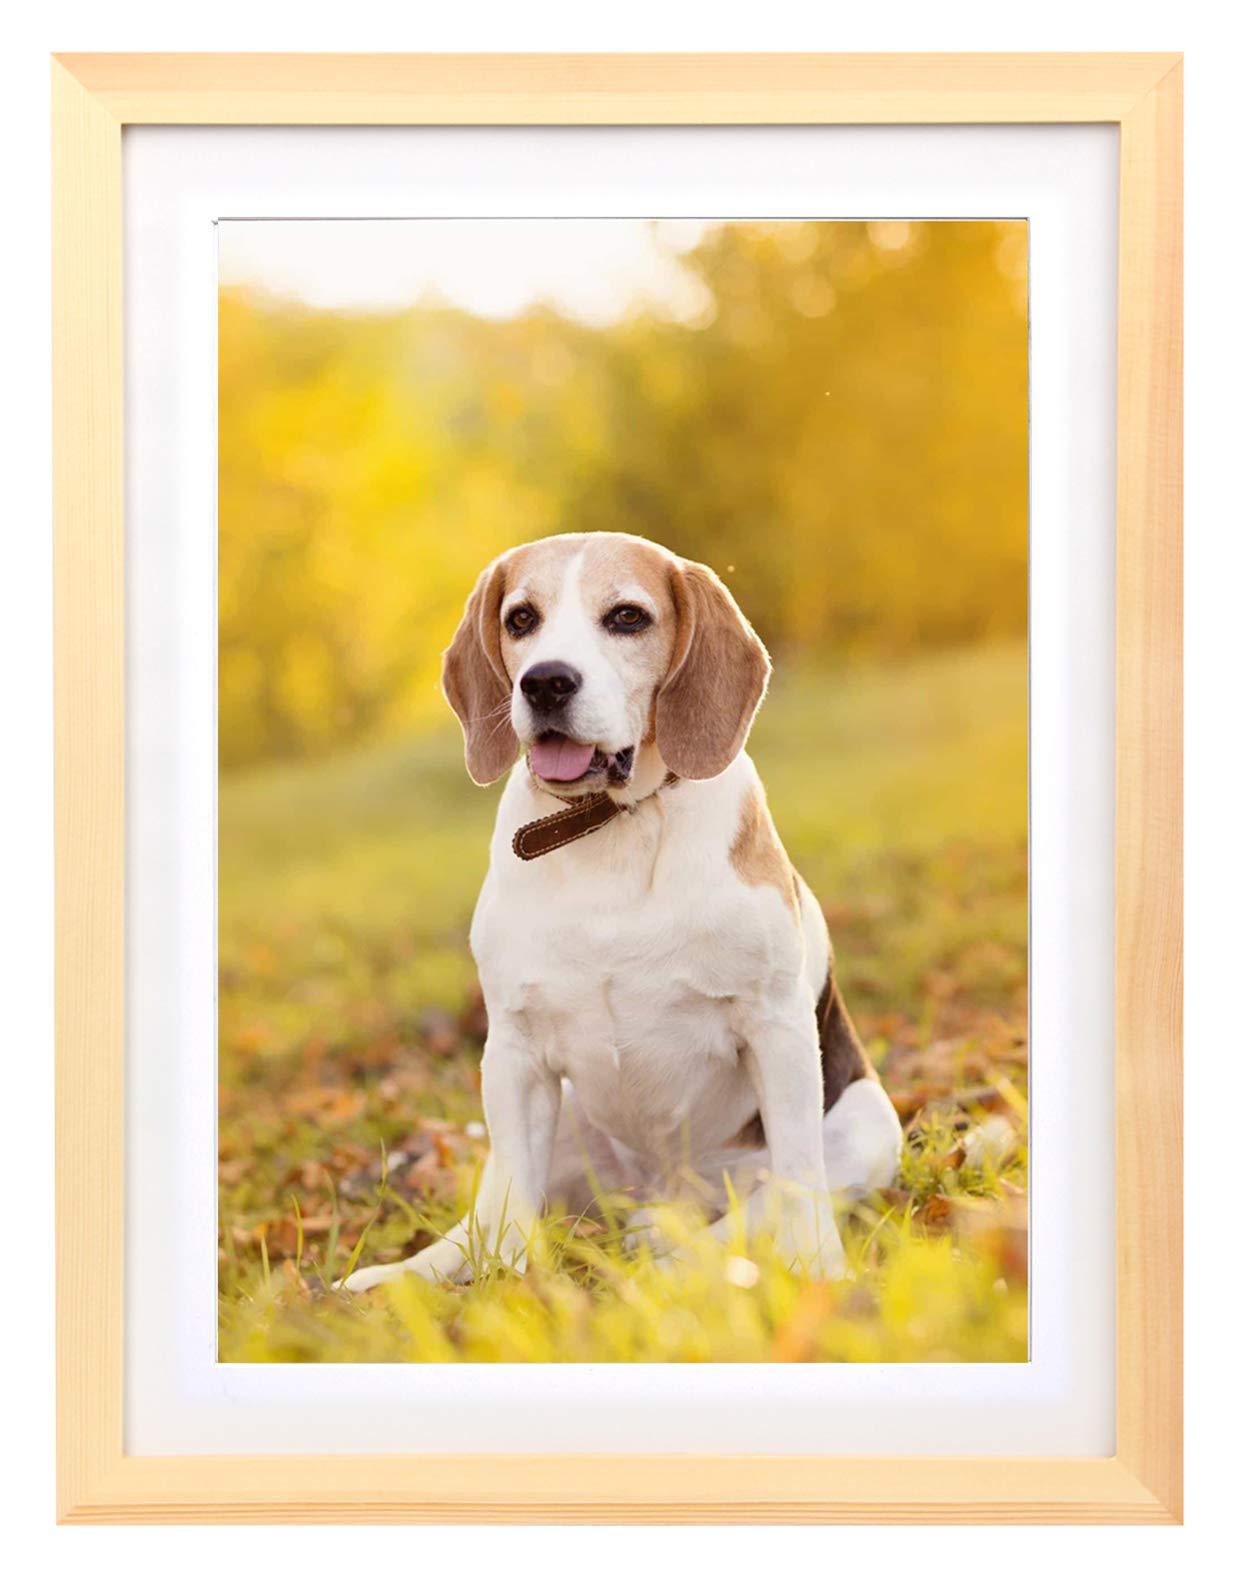 ioostar 12x16 diamond painting picture frame ?display pictures 10 x 14  inch/25x35 cm with mat or 12 x 16 inch/30x40 cm withou